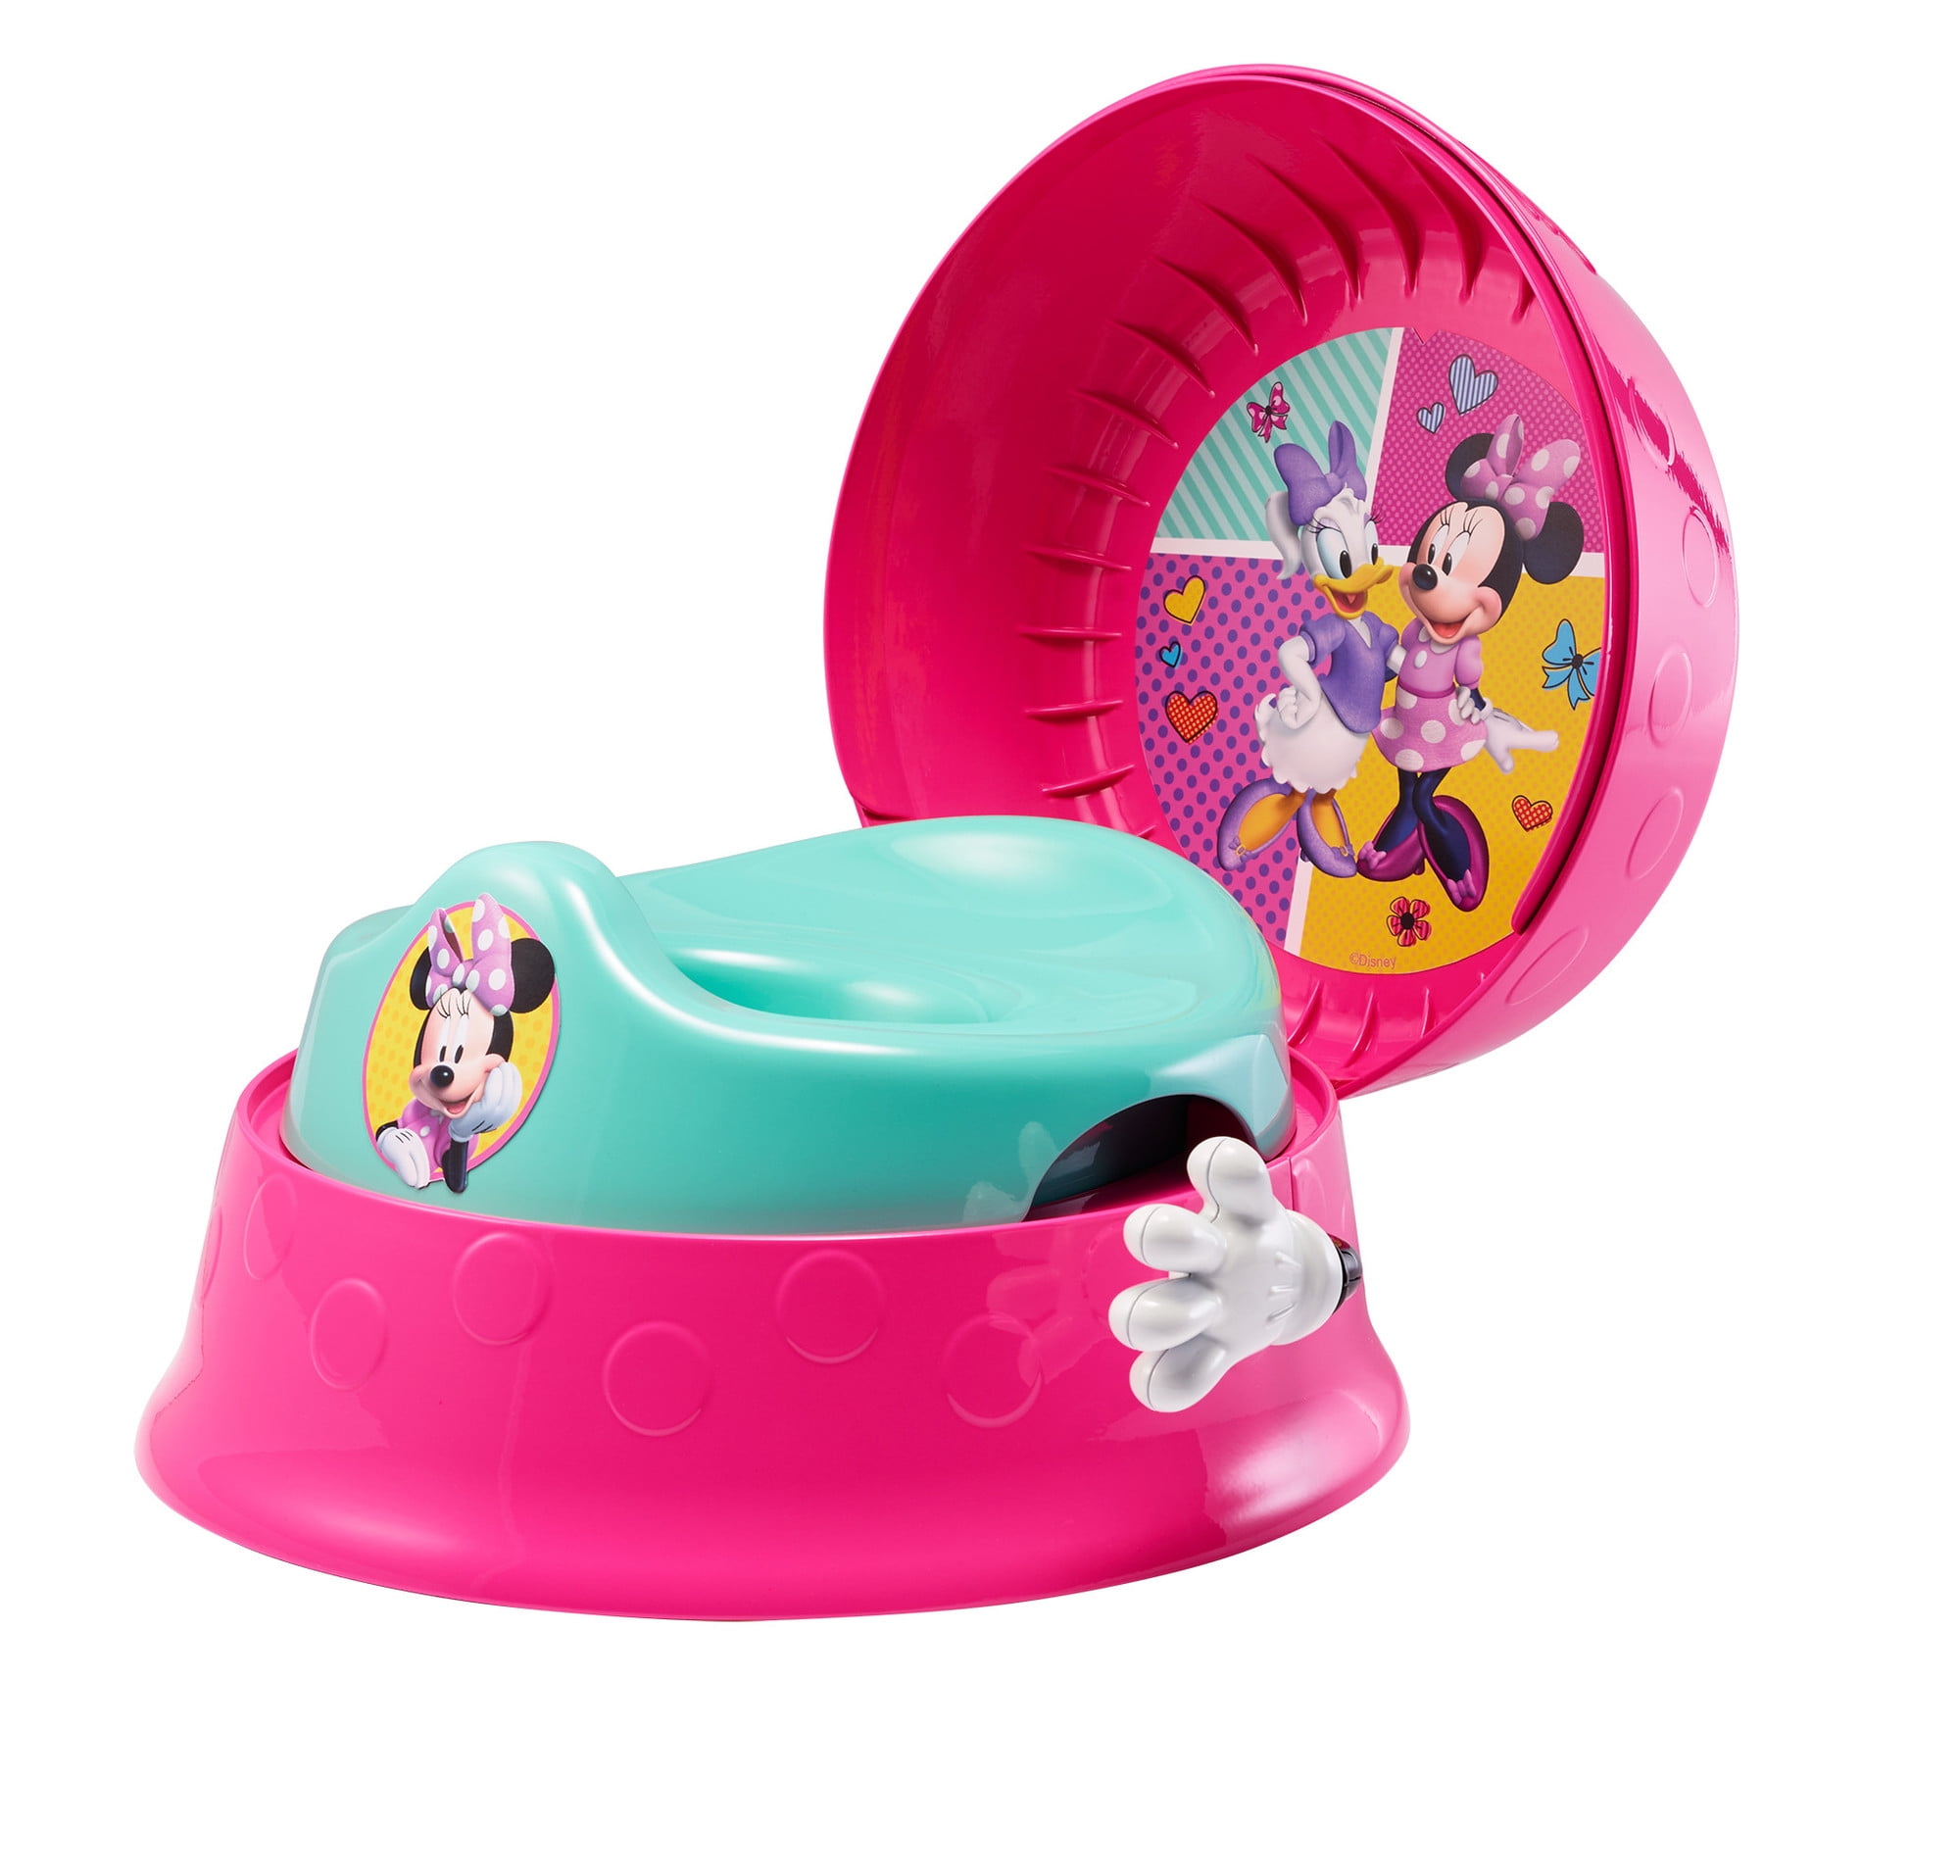 Disney Minnie Mouse 3in1 Potty Training Toilet Seat